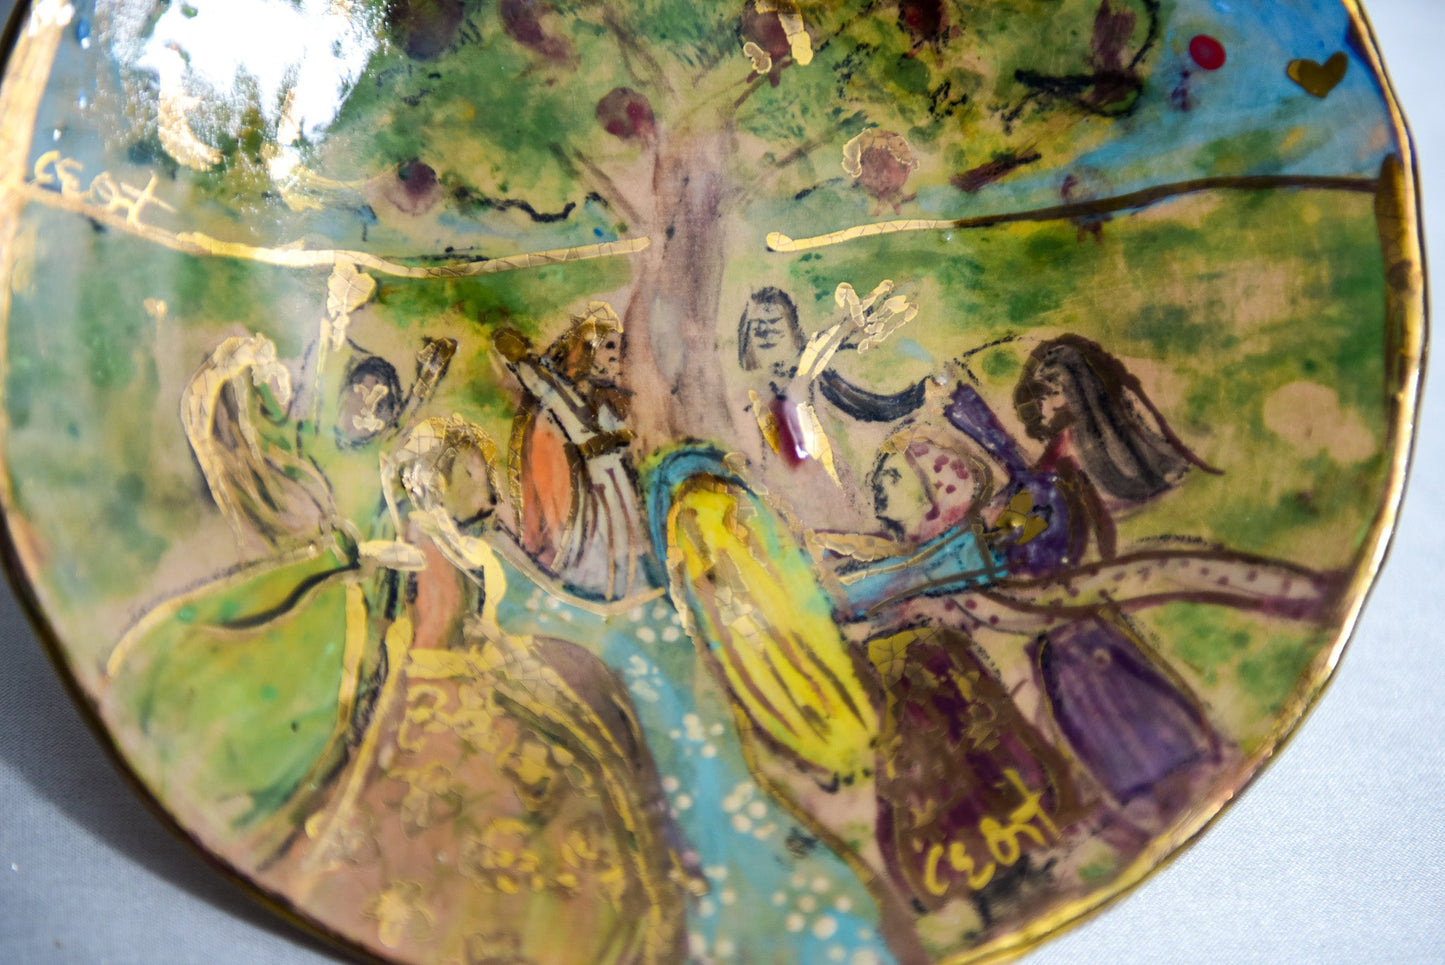 Dancing Women with Pomegranate Tree Cake Plate